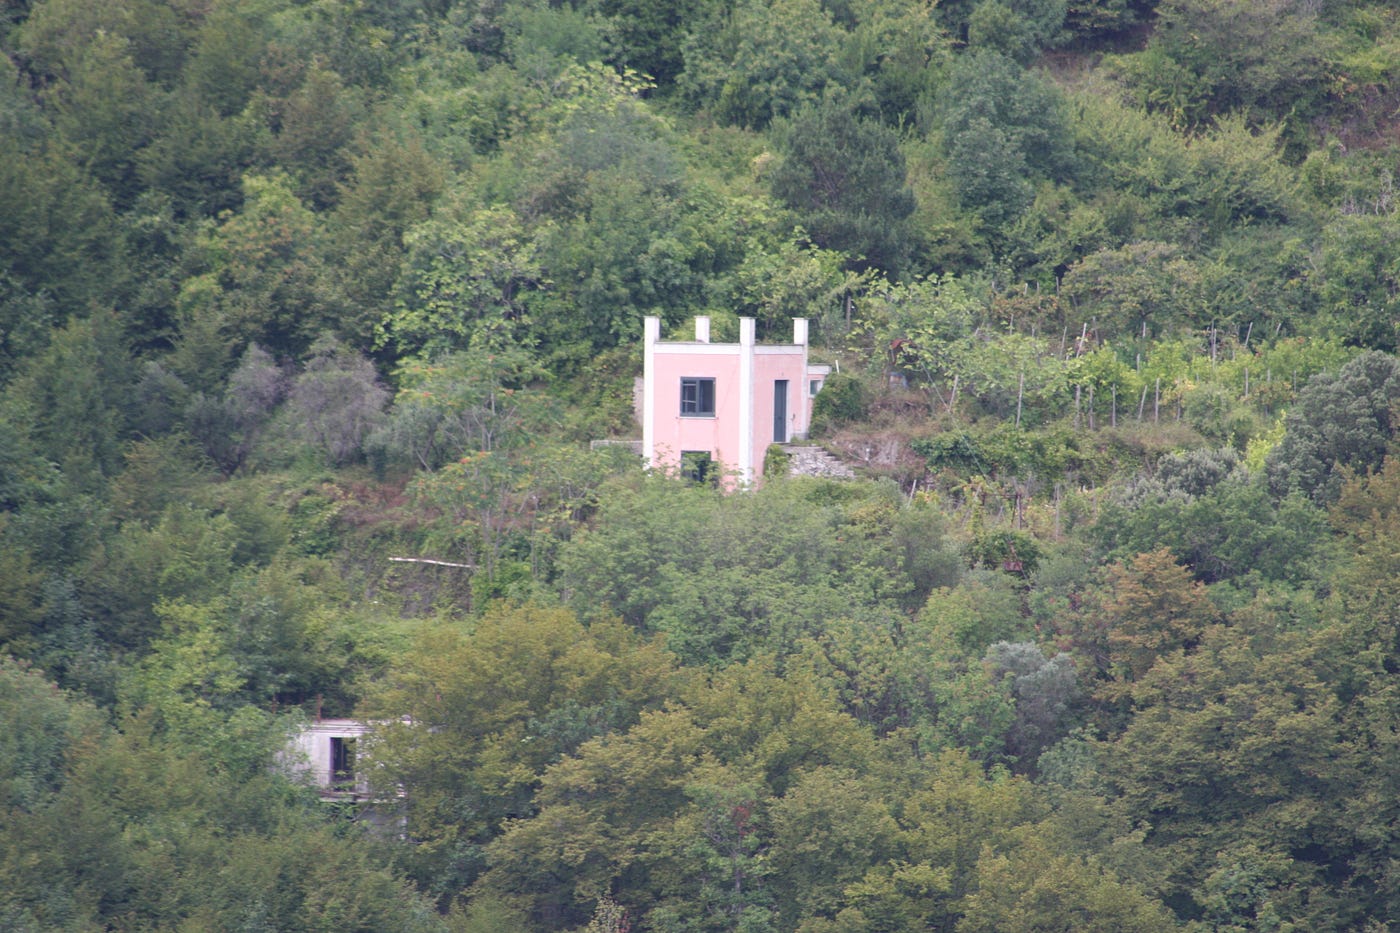 A small building nested on a hill surrounded by trees